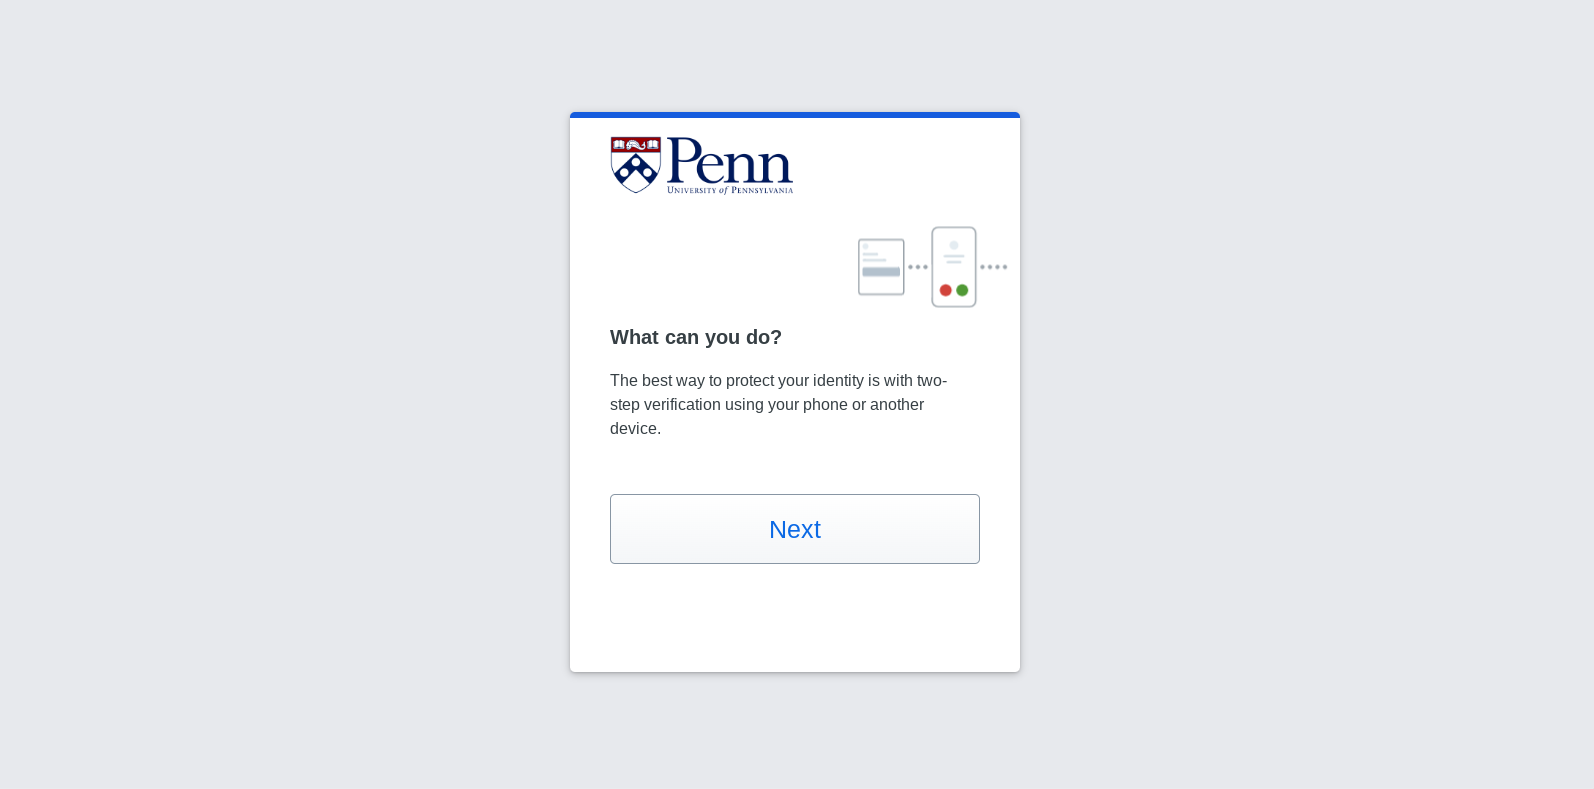 On the next screen, it reads "What can you do? The best way to protect your identity is with two-step verification using your phone or another device." This text is followed by a Next button.  